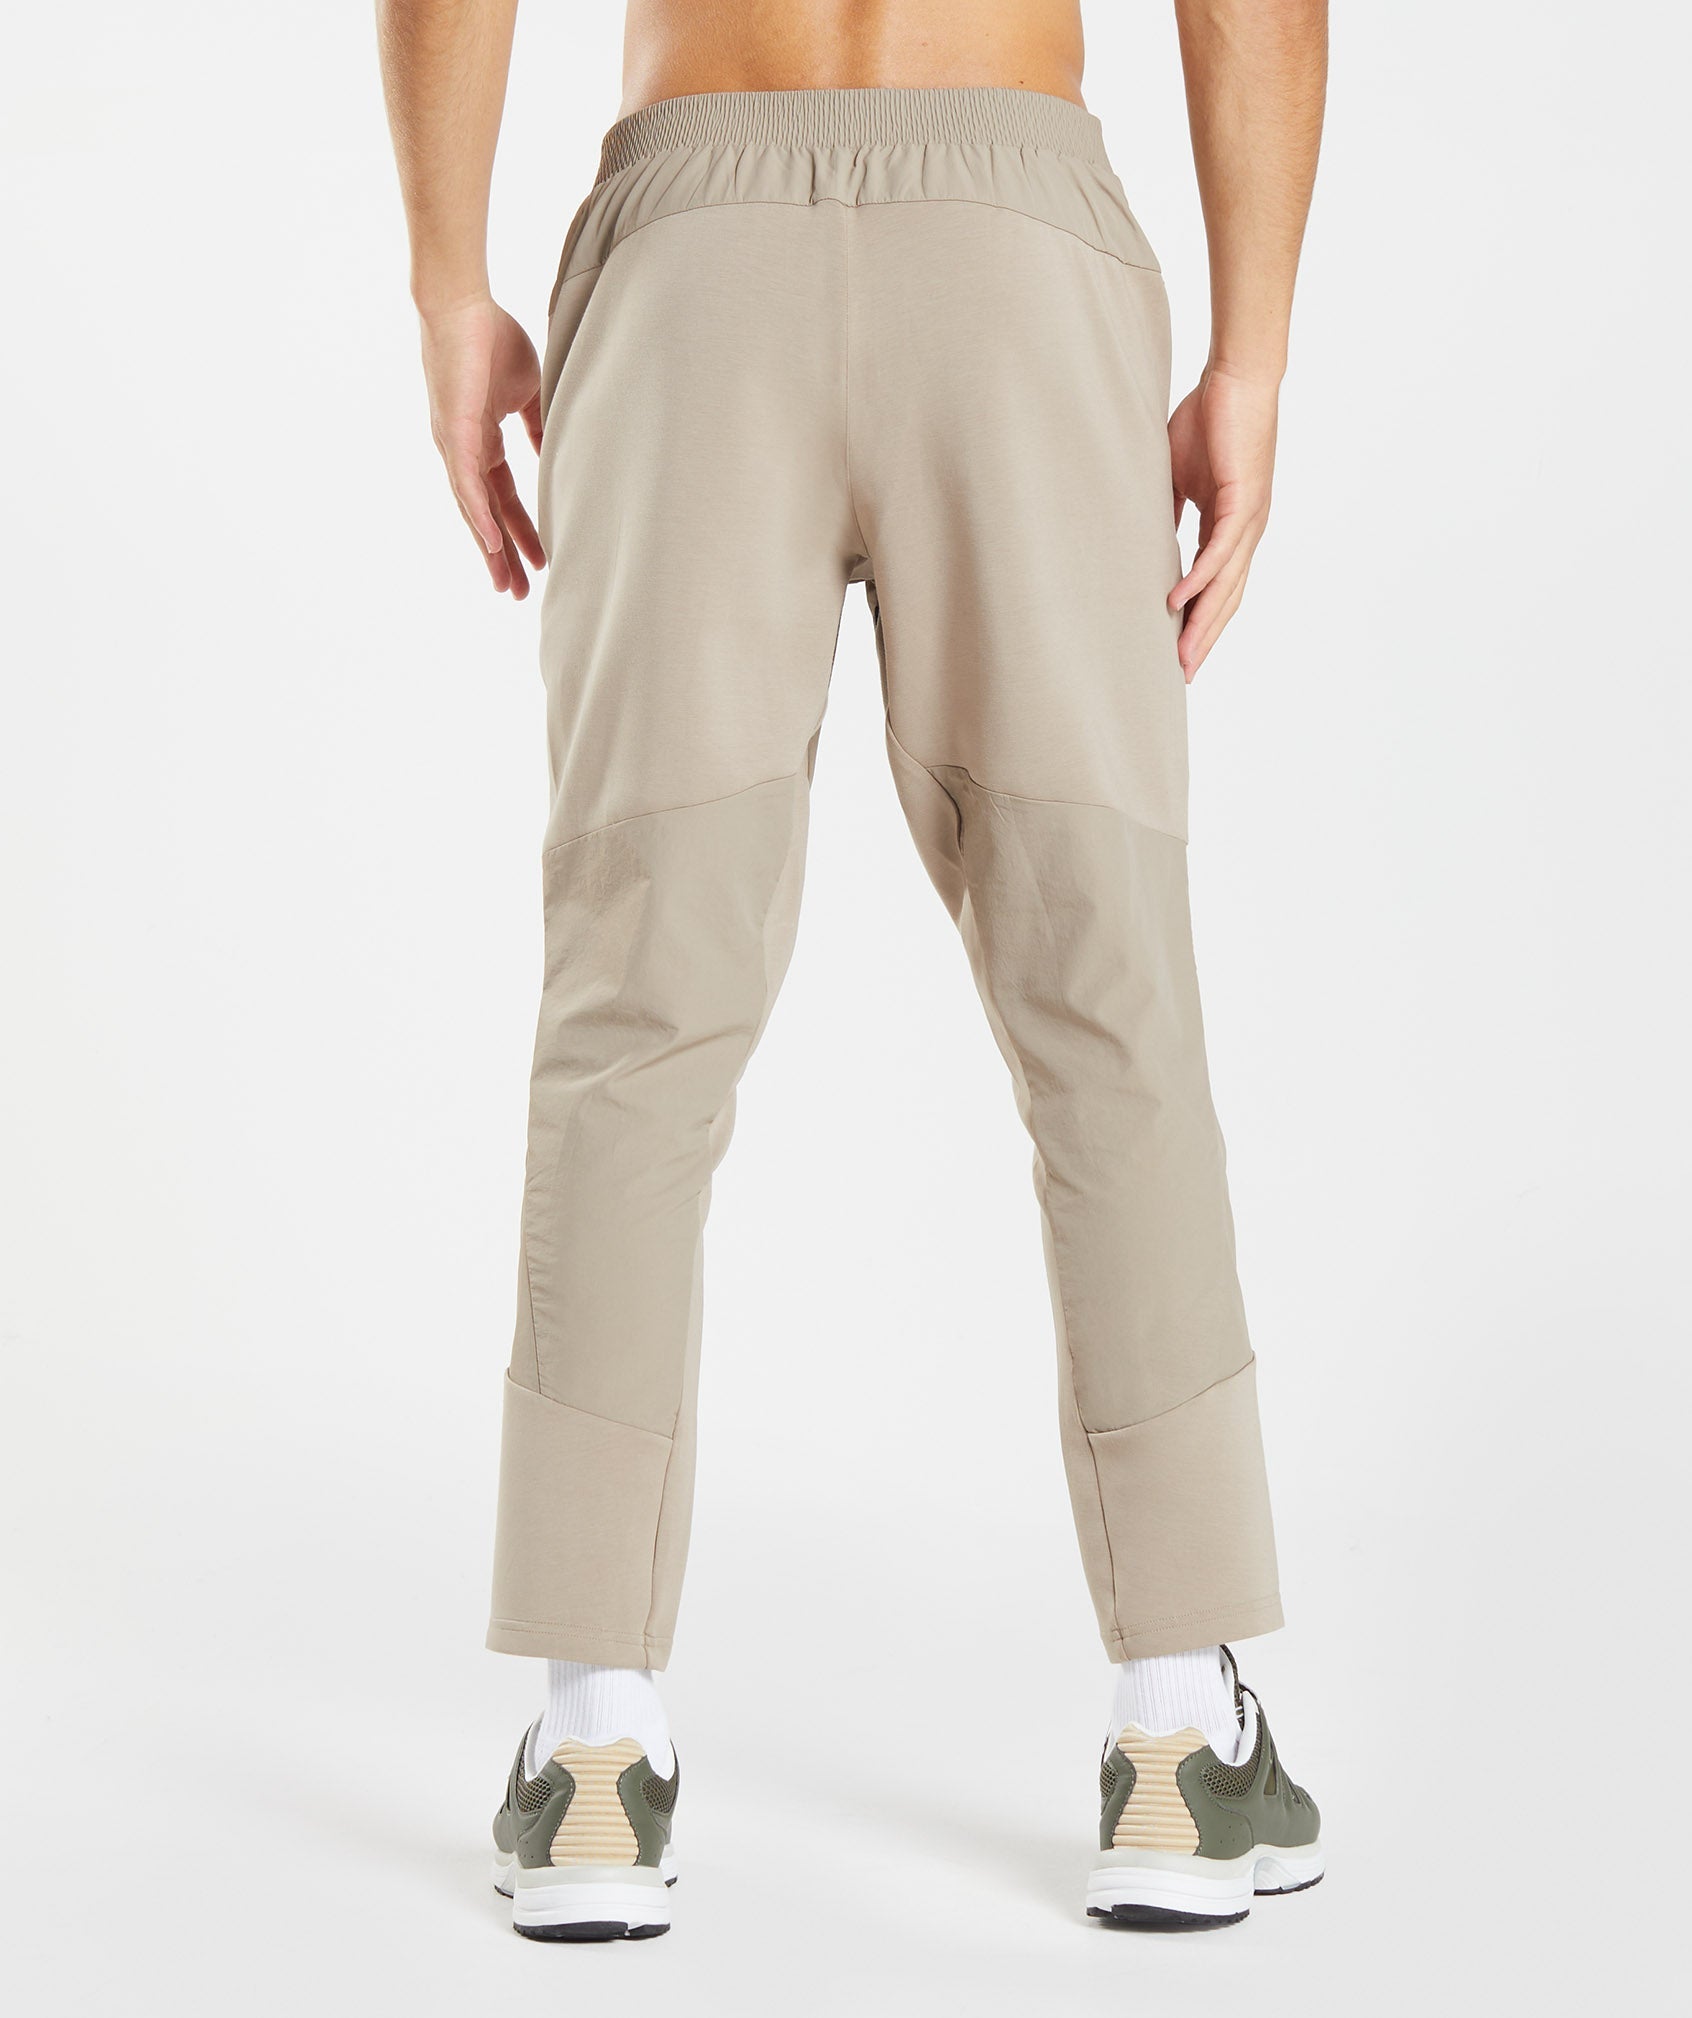 Retake Woven Joggers in Cement Brown - view 2